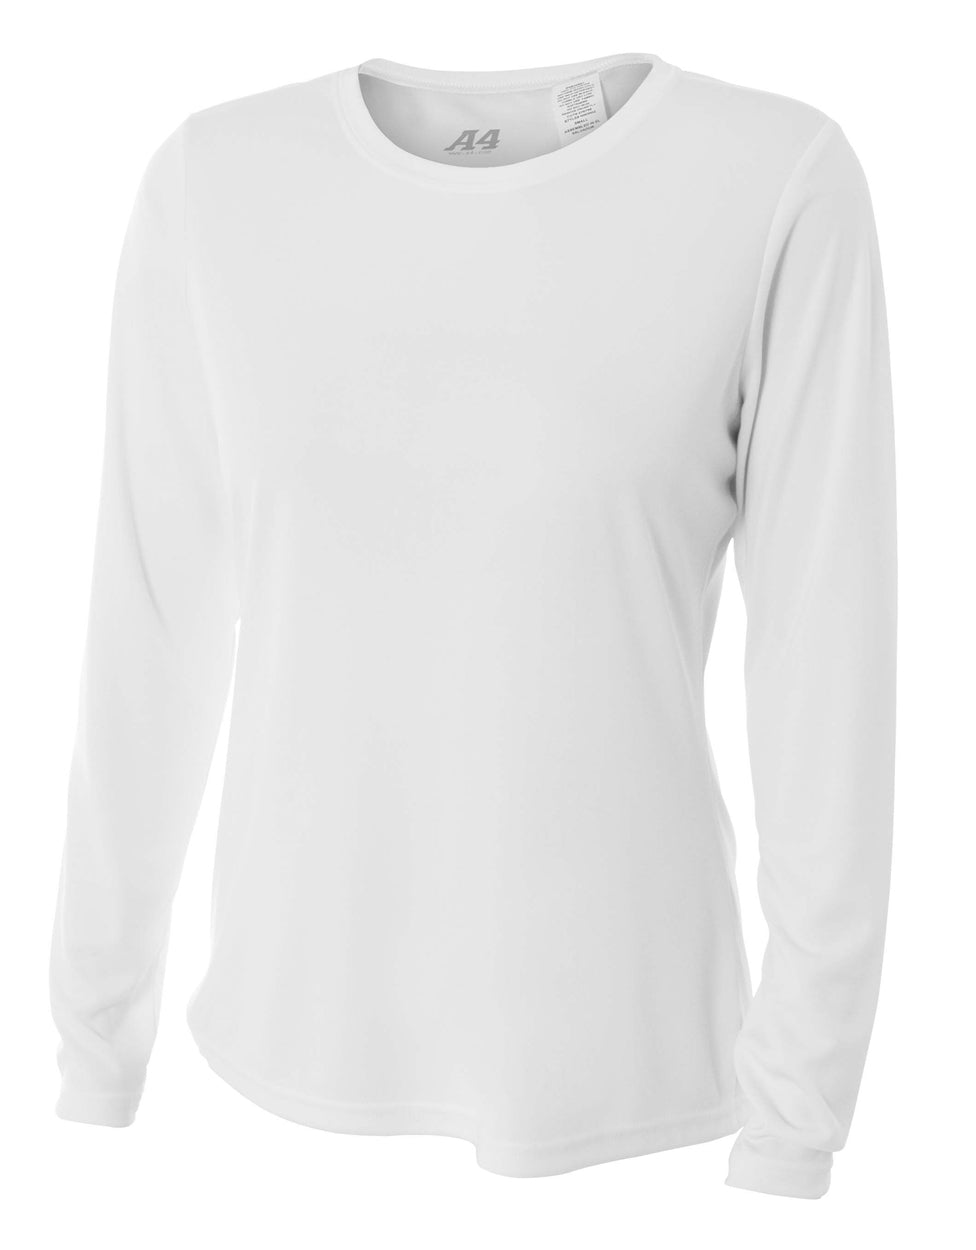 White A4 Long Sleeve Cooling Performance Crew